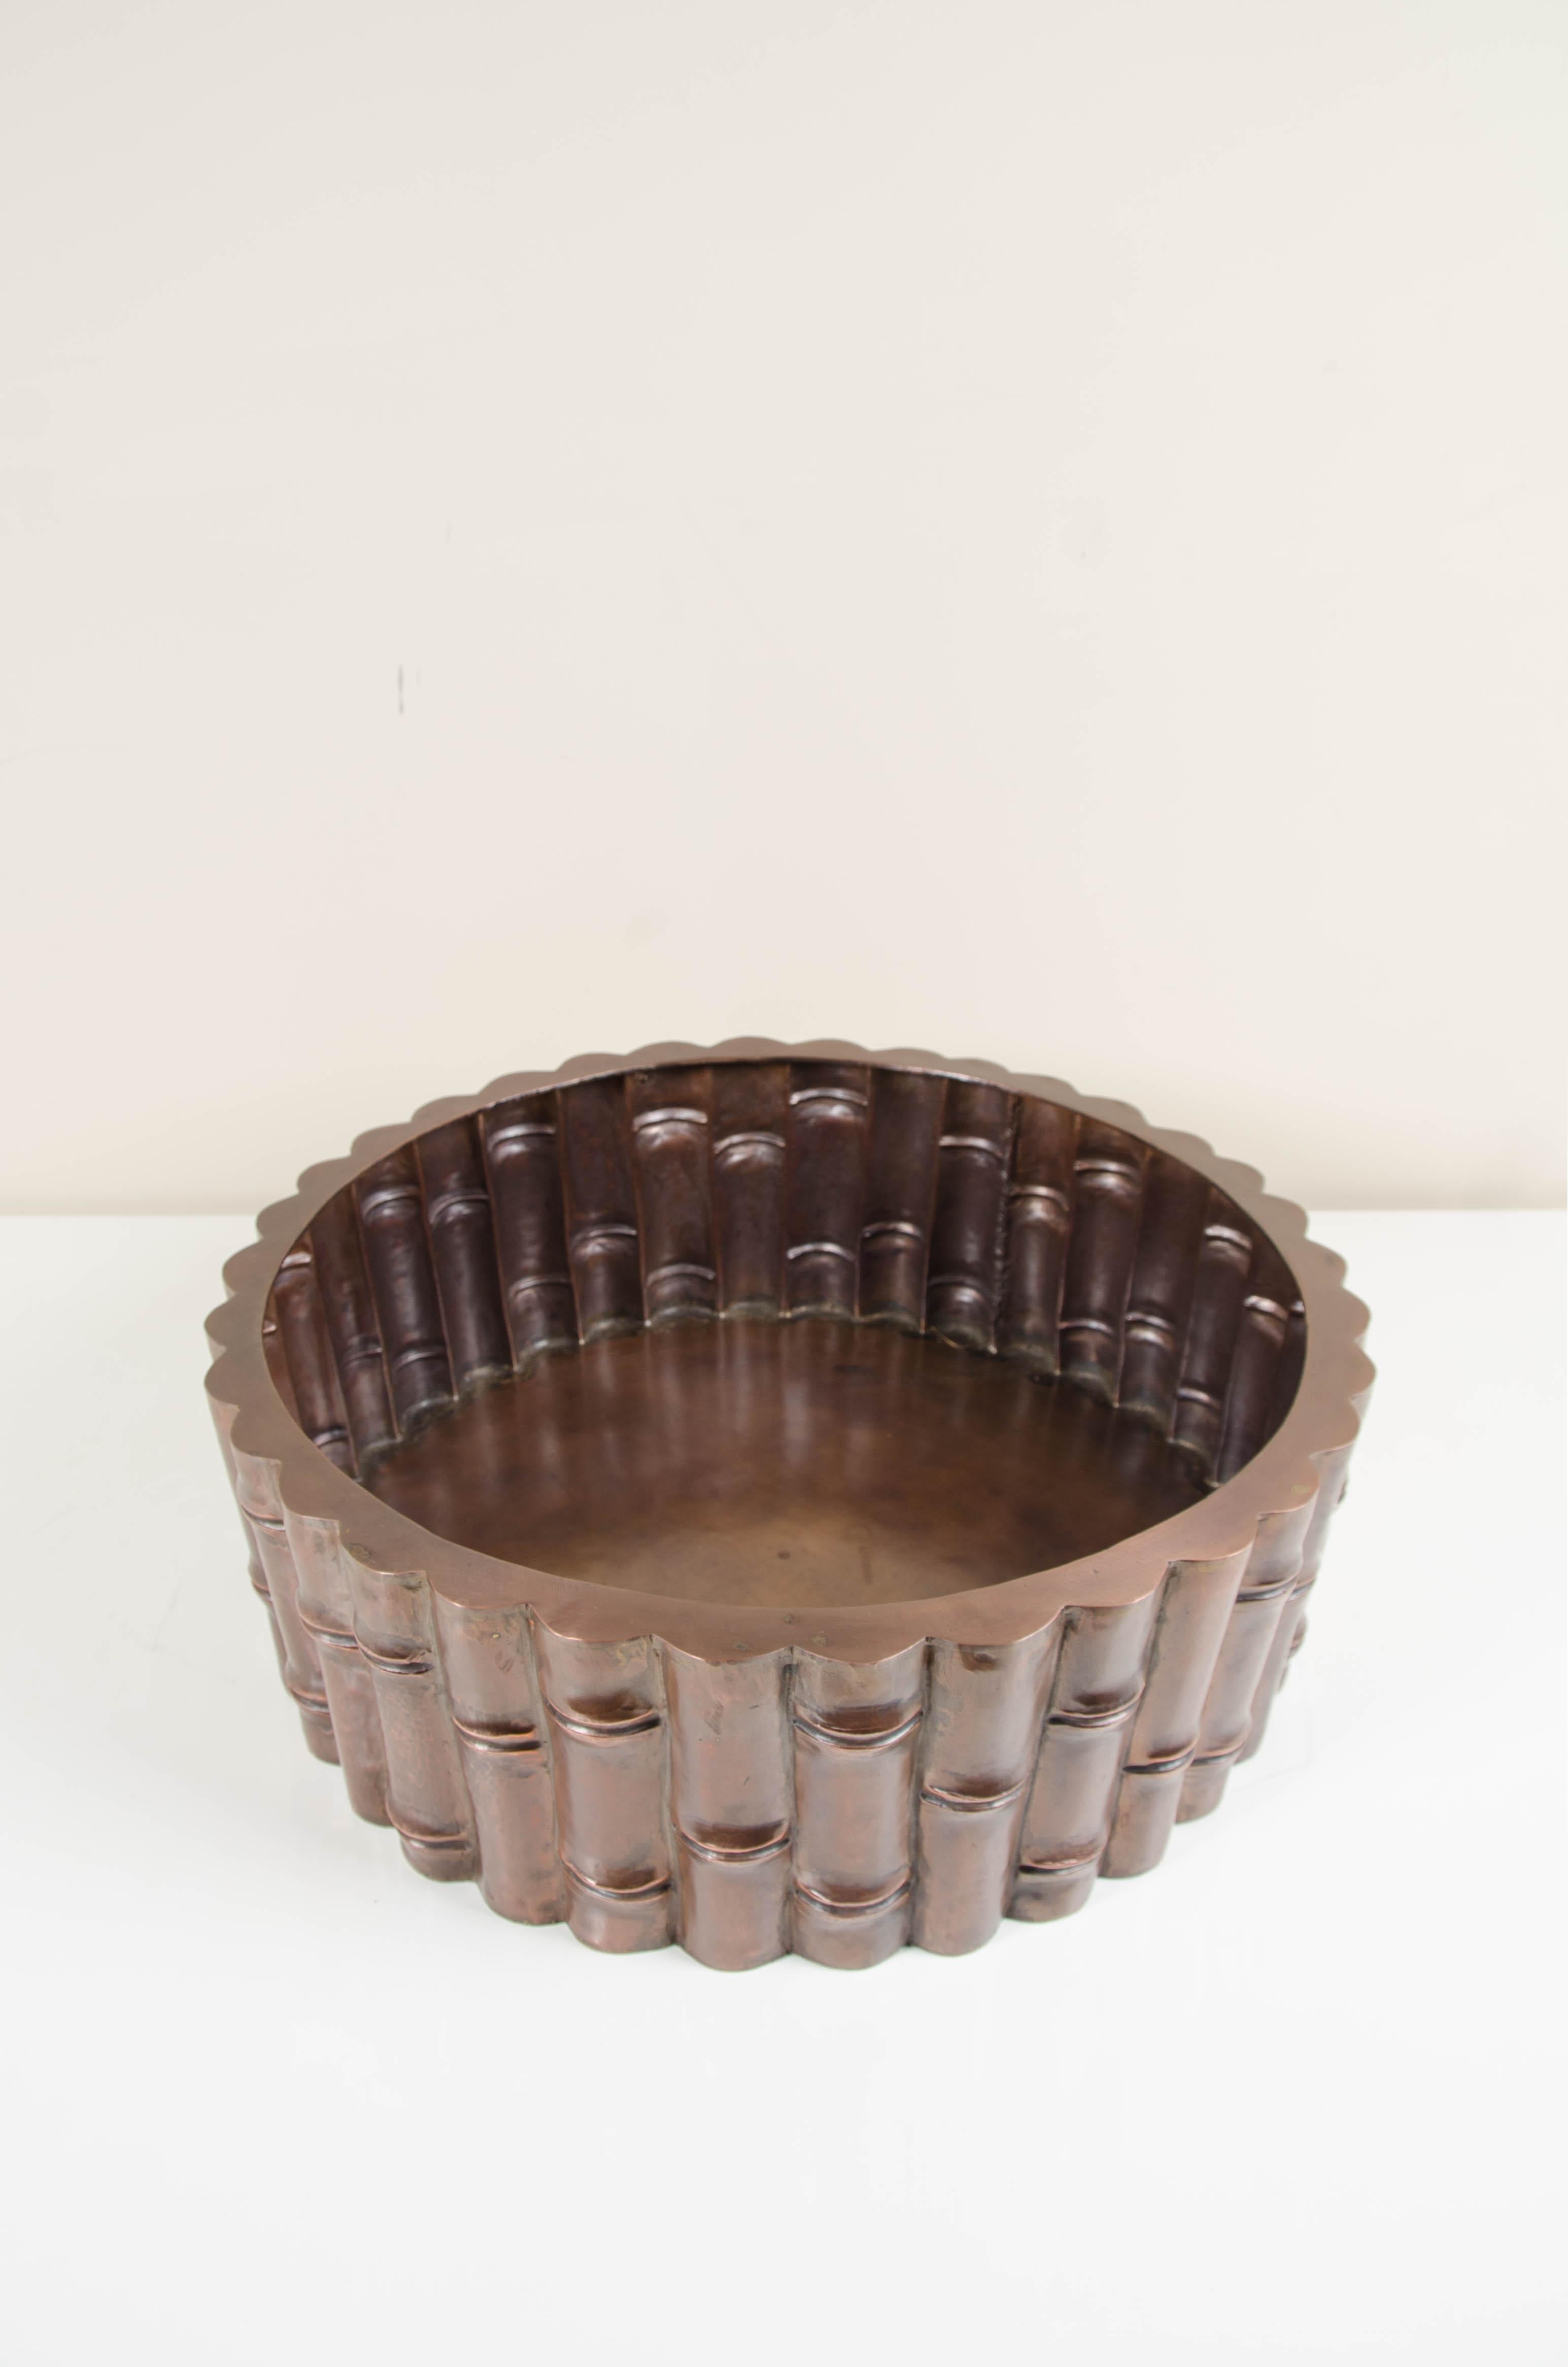 Contemporary Bamboo Design Low Cachepot, Antique Copper by Robert Kuo, Limited Edition For Sale